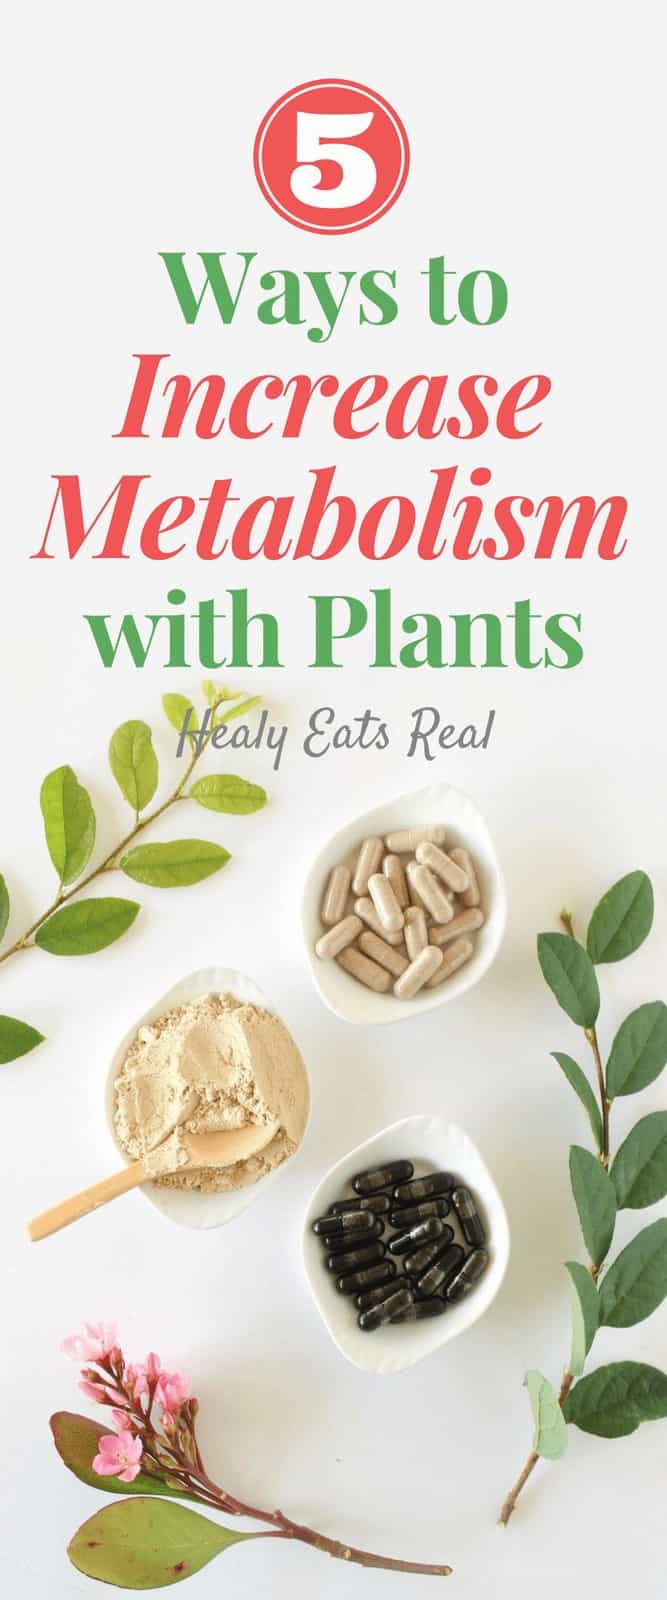 5 Ways to Increase Metabolism with Plants